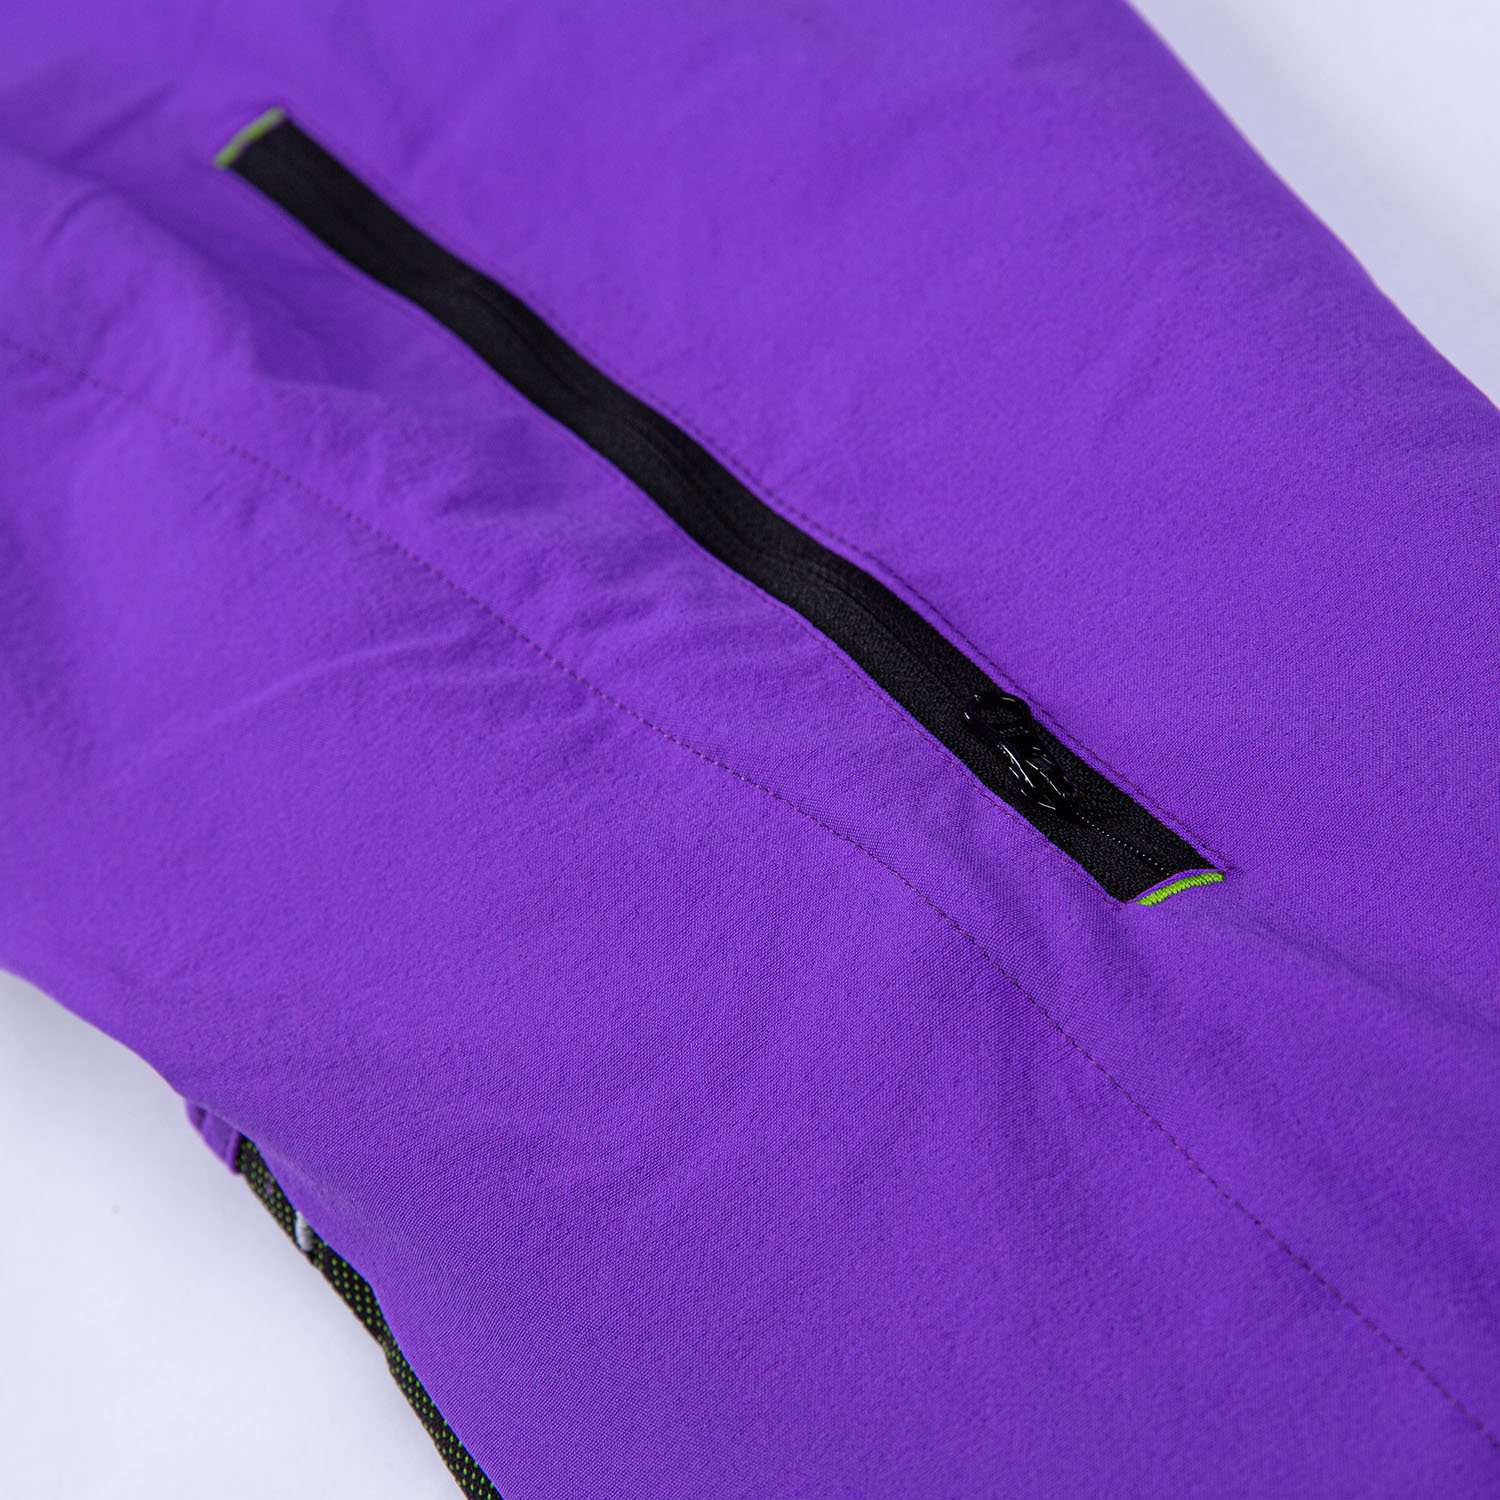 AT4071 Freestyle Design Chainsaw Trousers C Class 1 - Purple